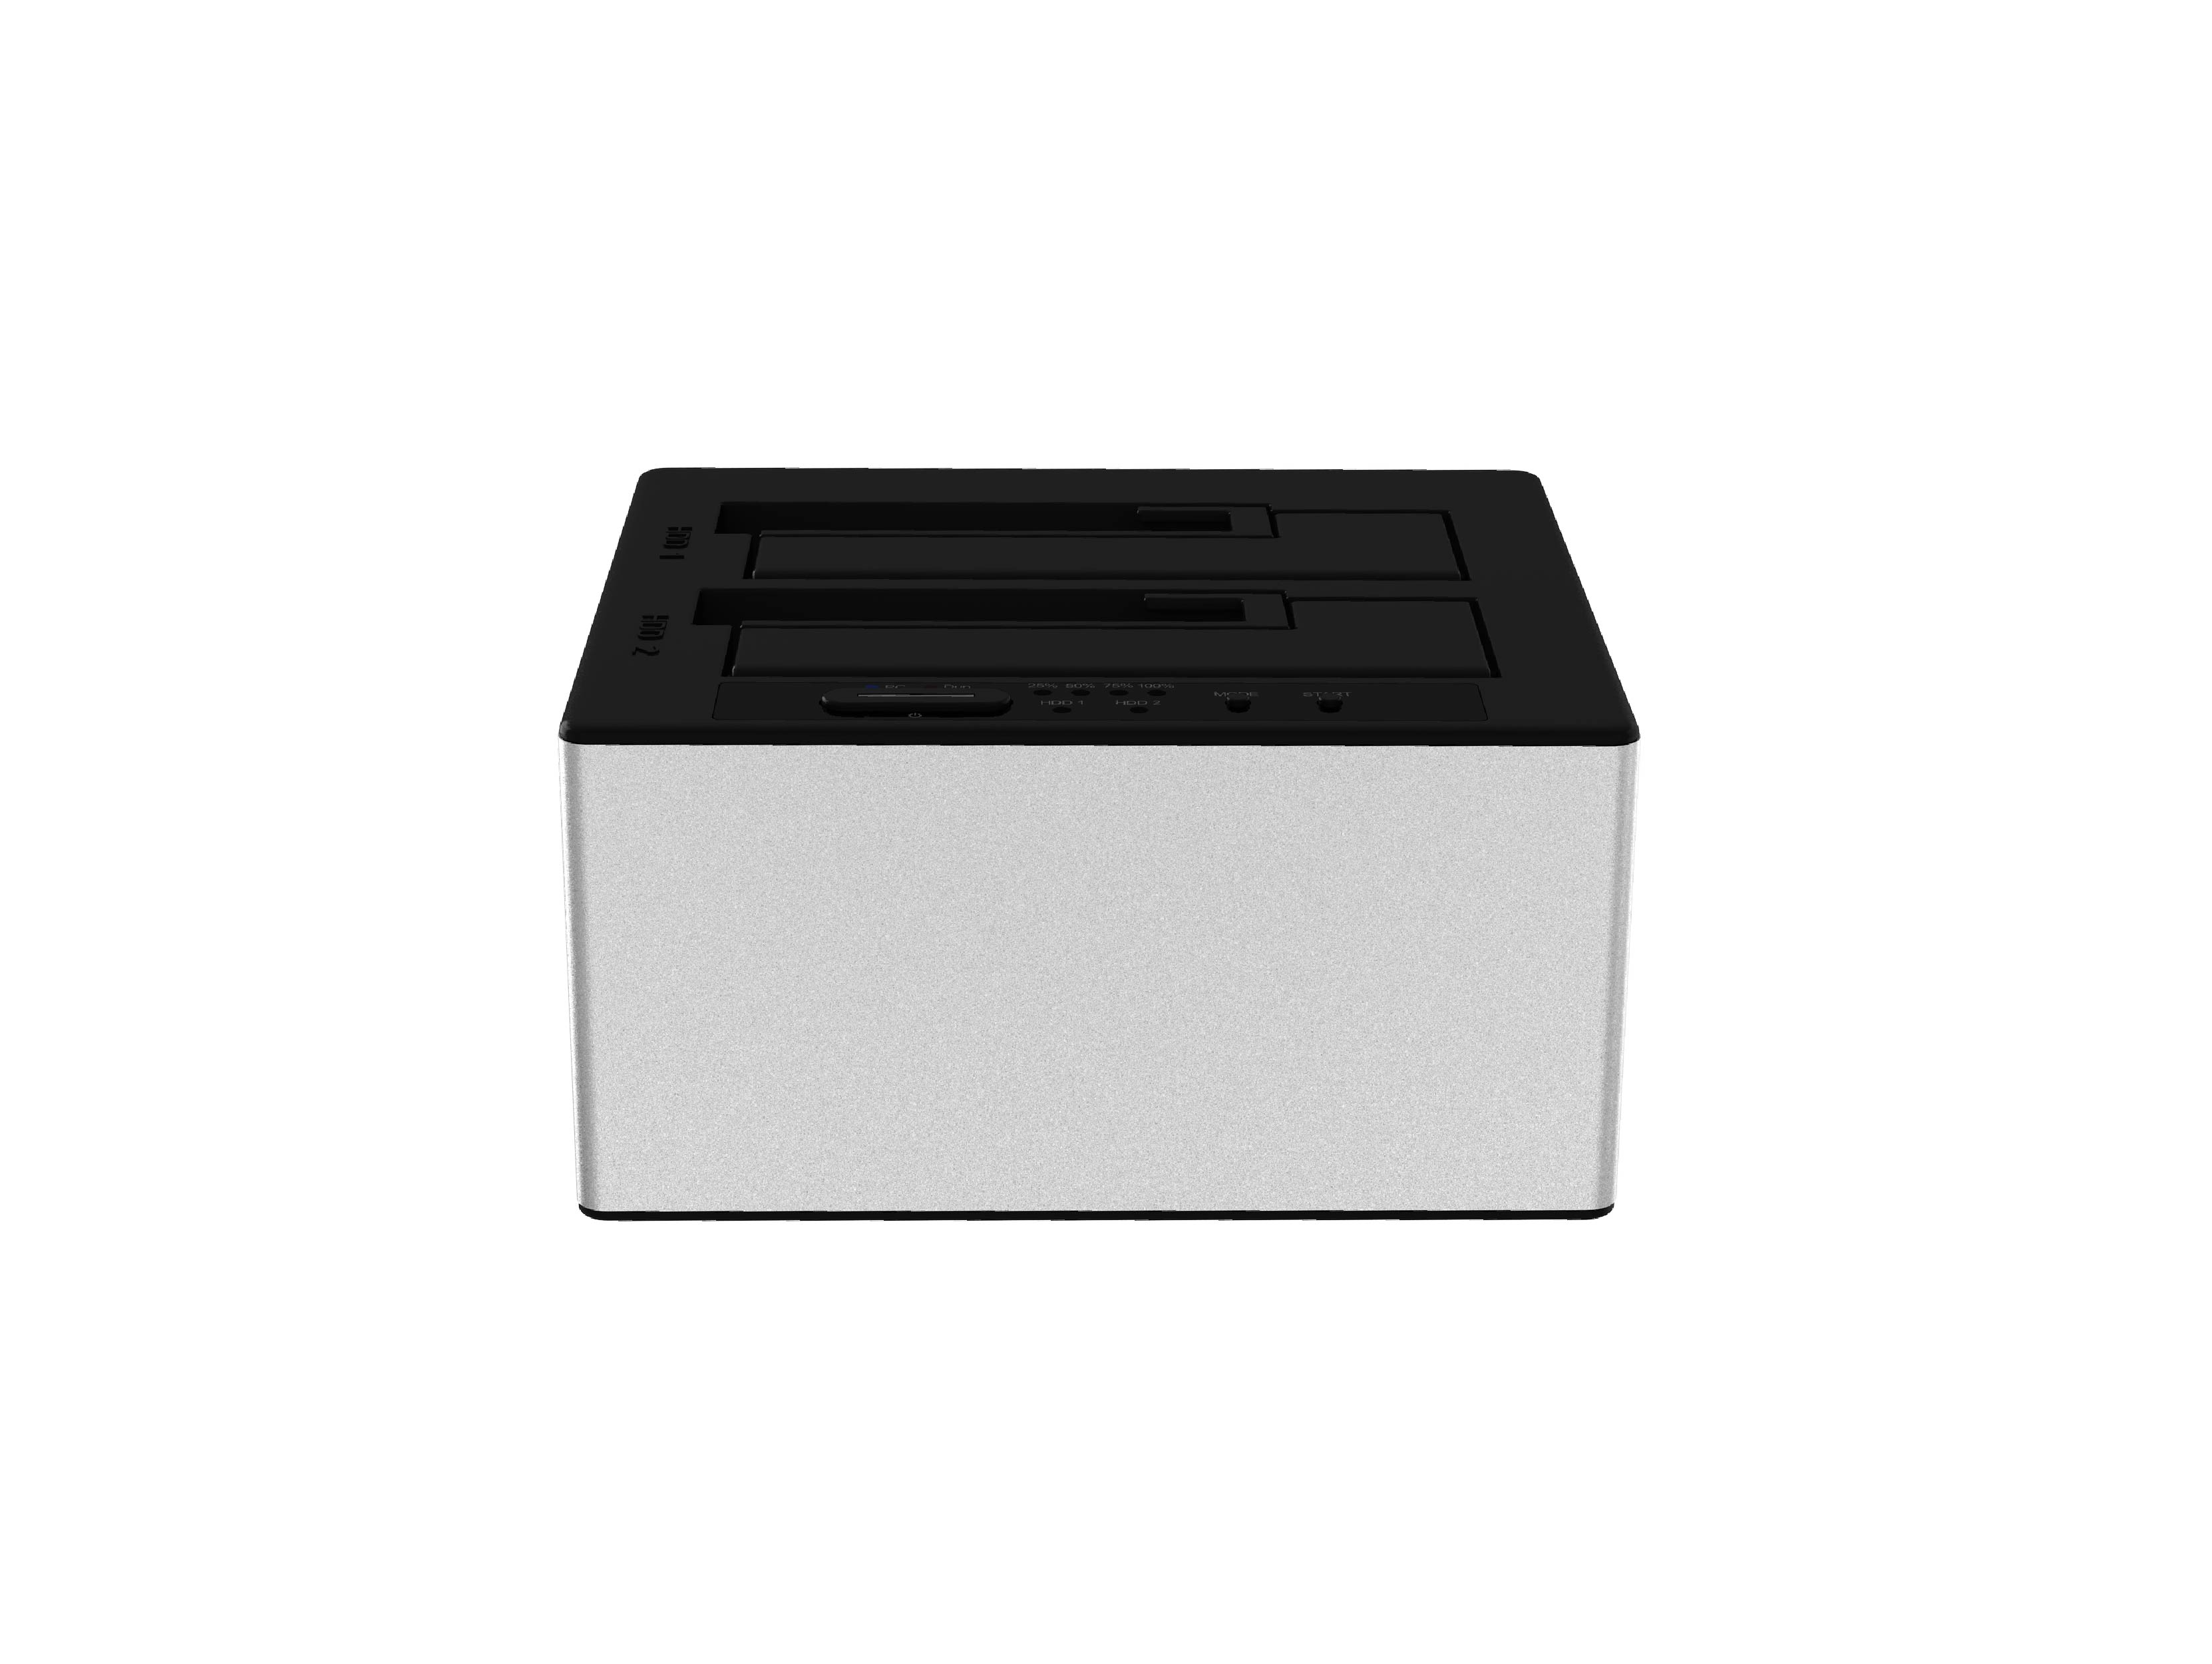 2 Bay SATA SSD/HDD Duplicator (SI-7925USJ3-D), applicable 2x 3.5"or 2.5" SATA HDD/SSD, support PC Mode & Clone mode switchable, USB-B 5Gbps to host.